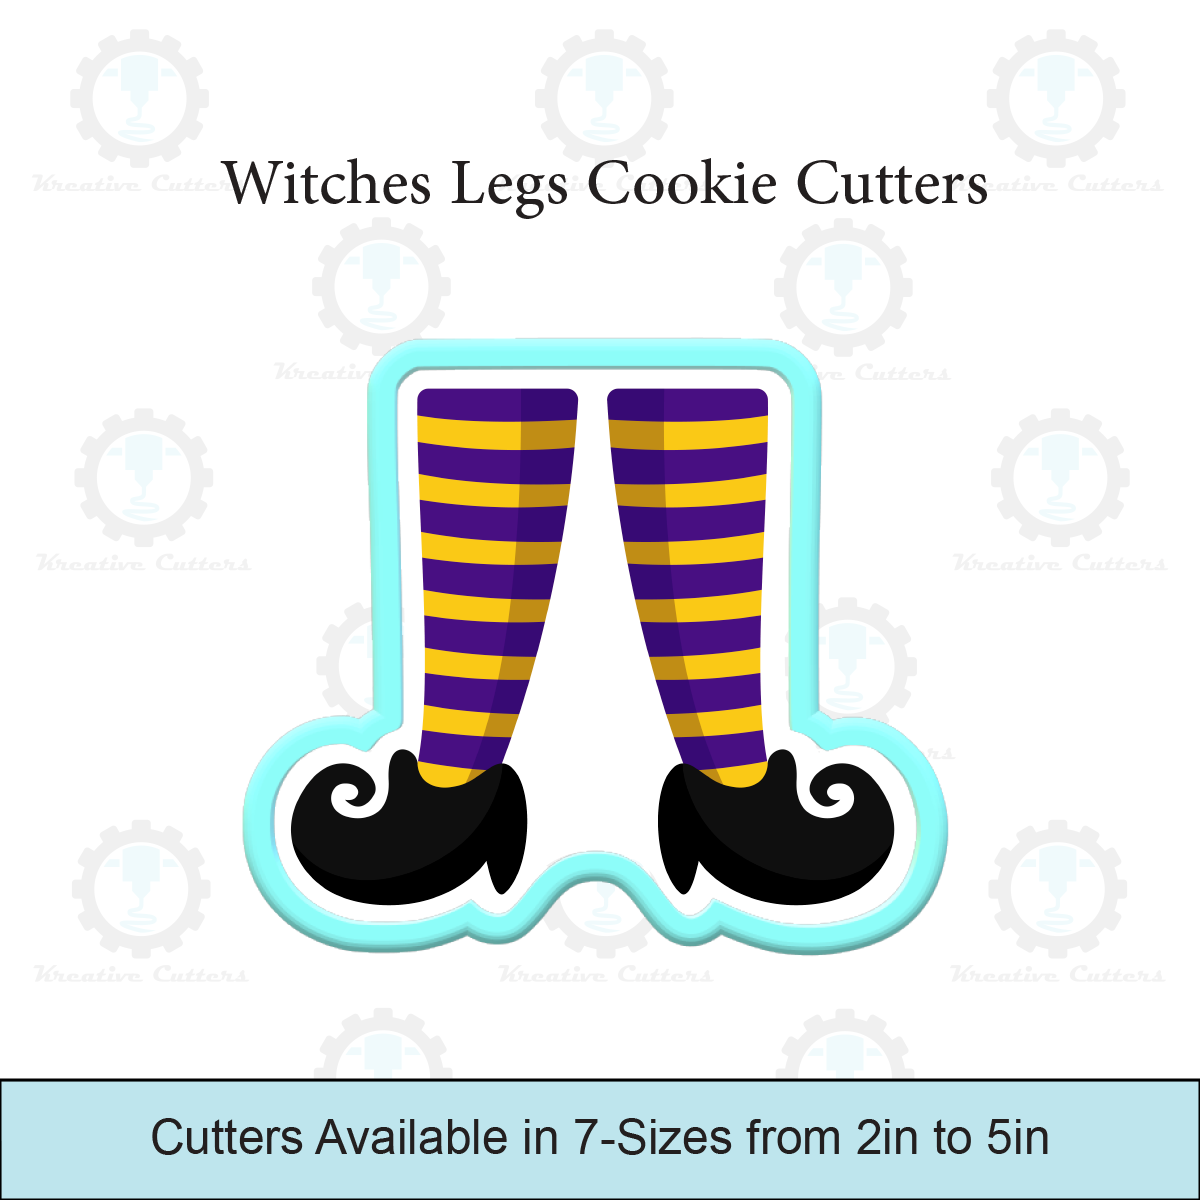 Witches Legs Cookie Cutters